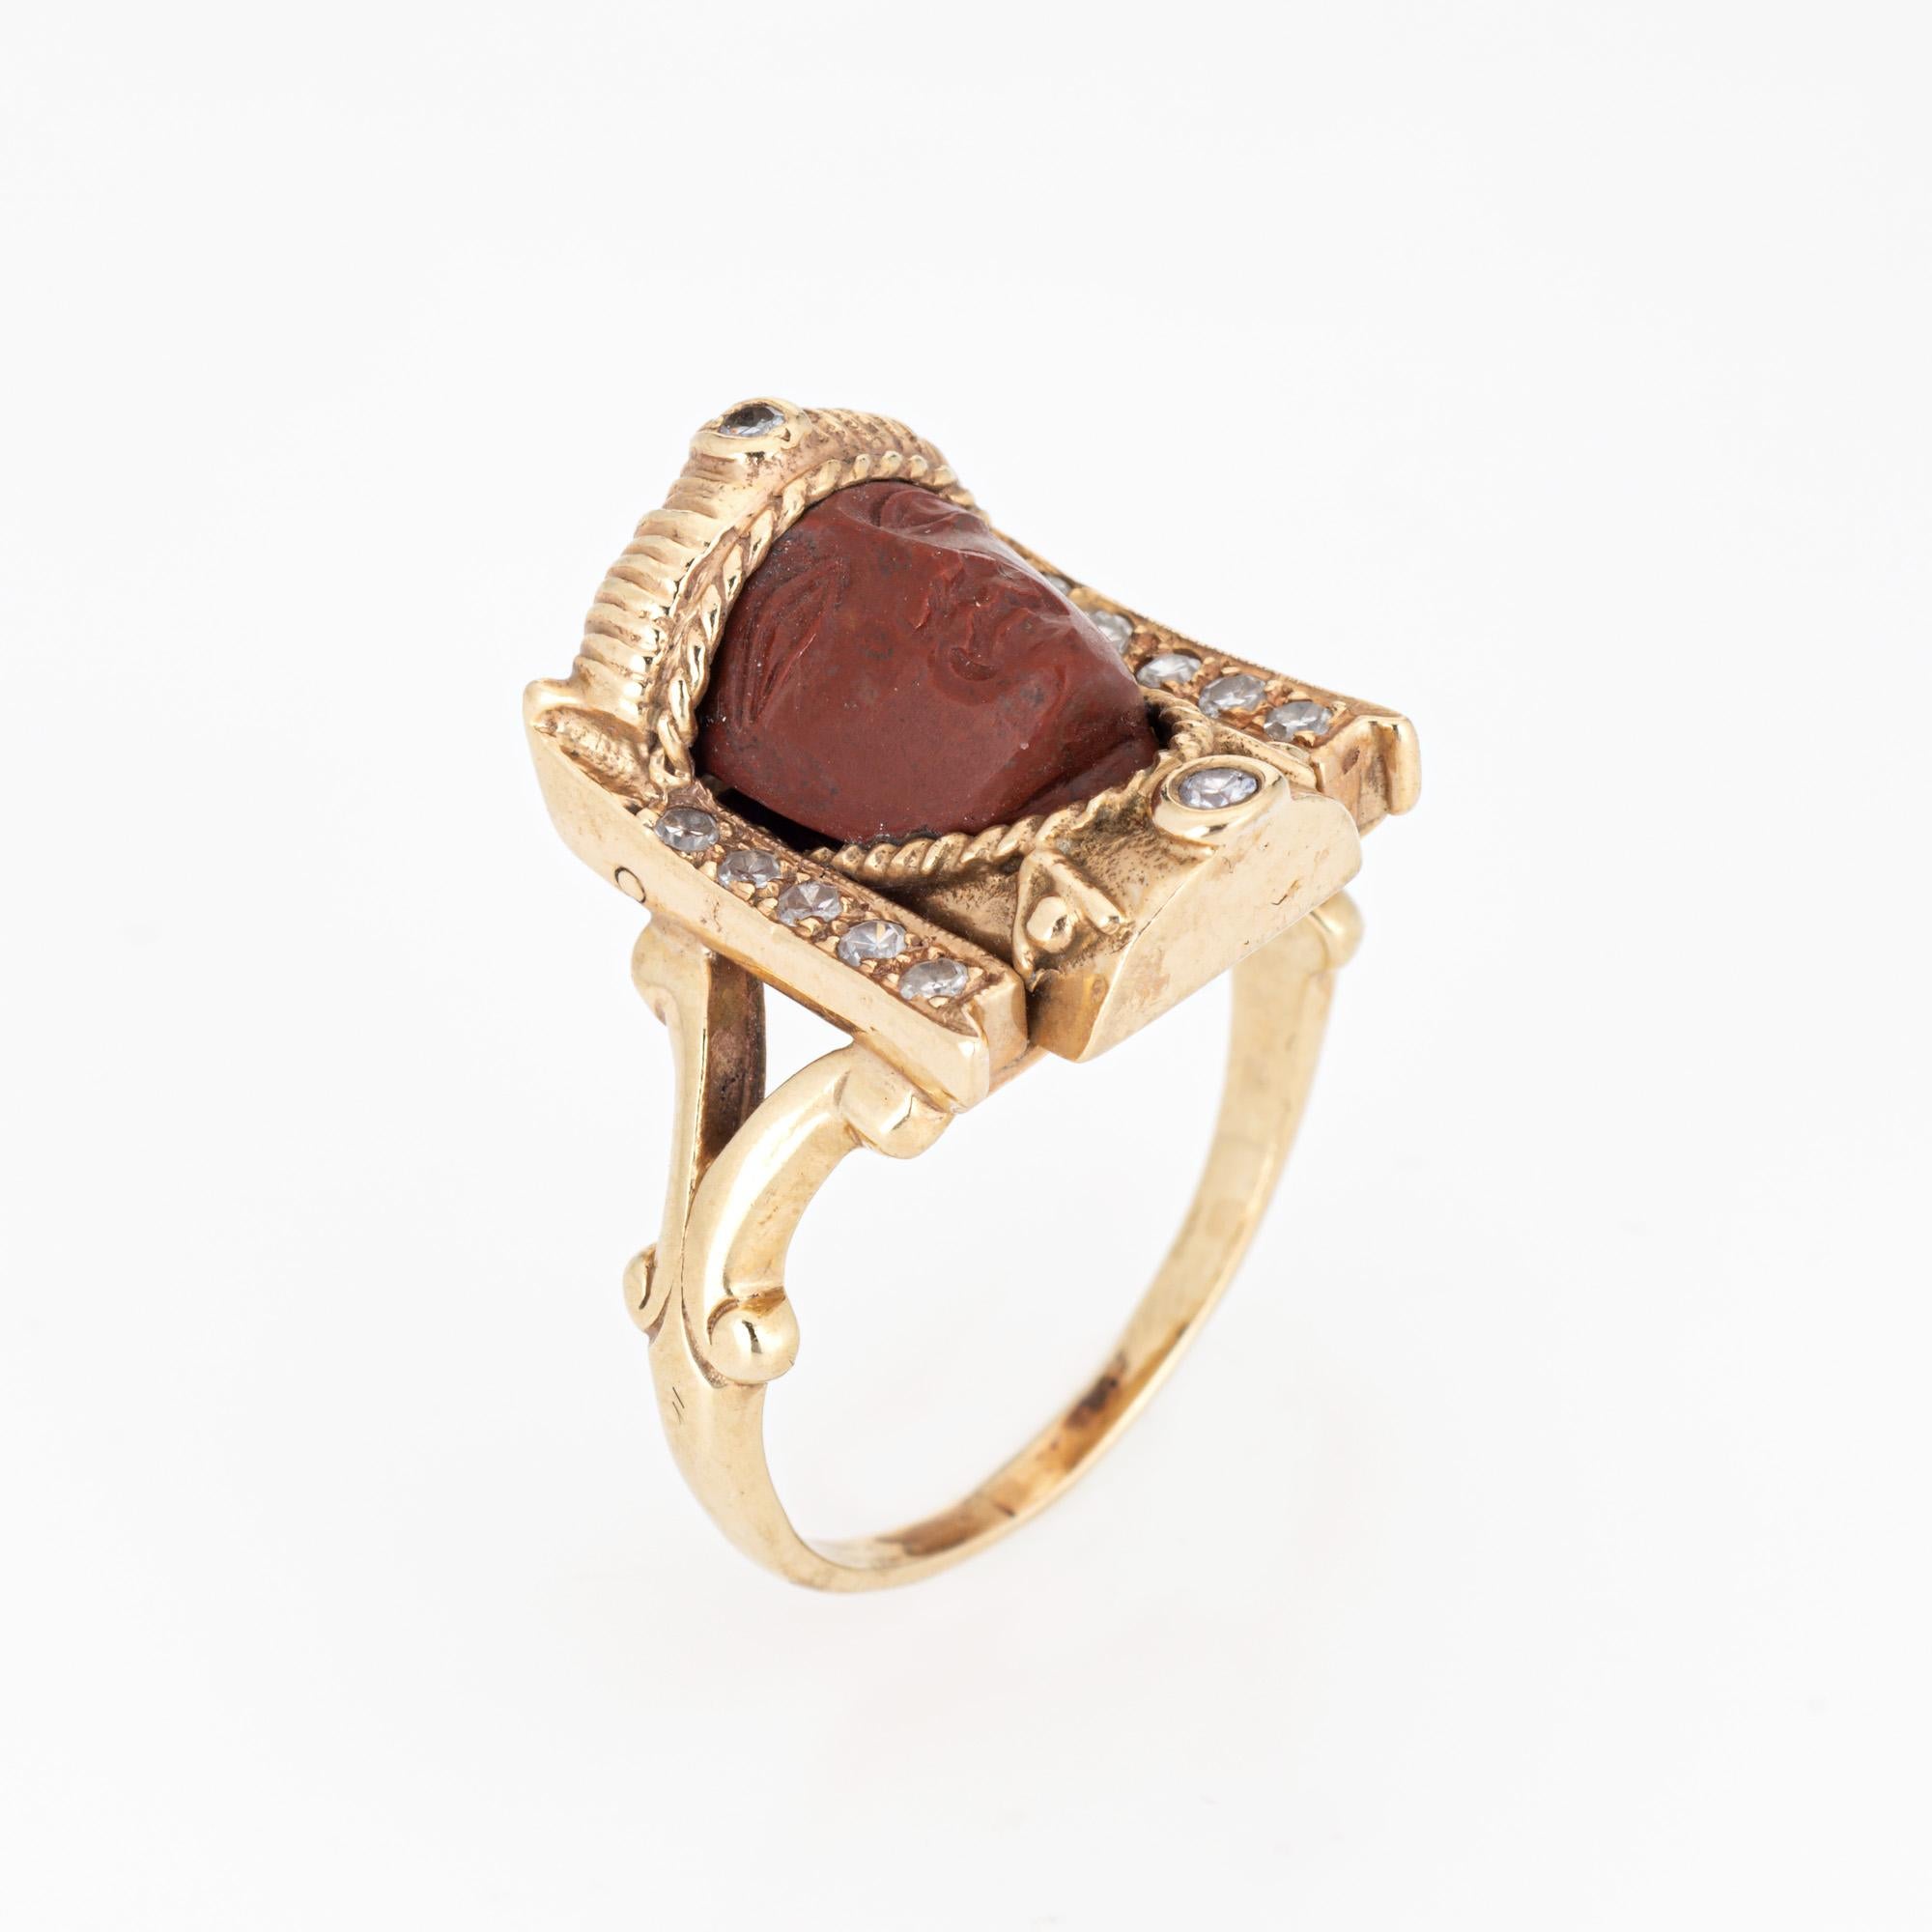 Finely detailed vintage Art Deco Egyptian Revival Pharaoh ring (circa 1920s) crafted in 14k white gold. 

Jasper measures 9mm x 8mm. 12 small single cut diamonds total an estimated 0.06 carats (estimated at H-I color and SI2-I2 clarity). The jasper